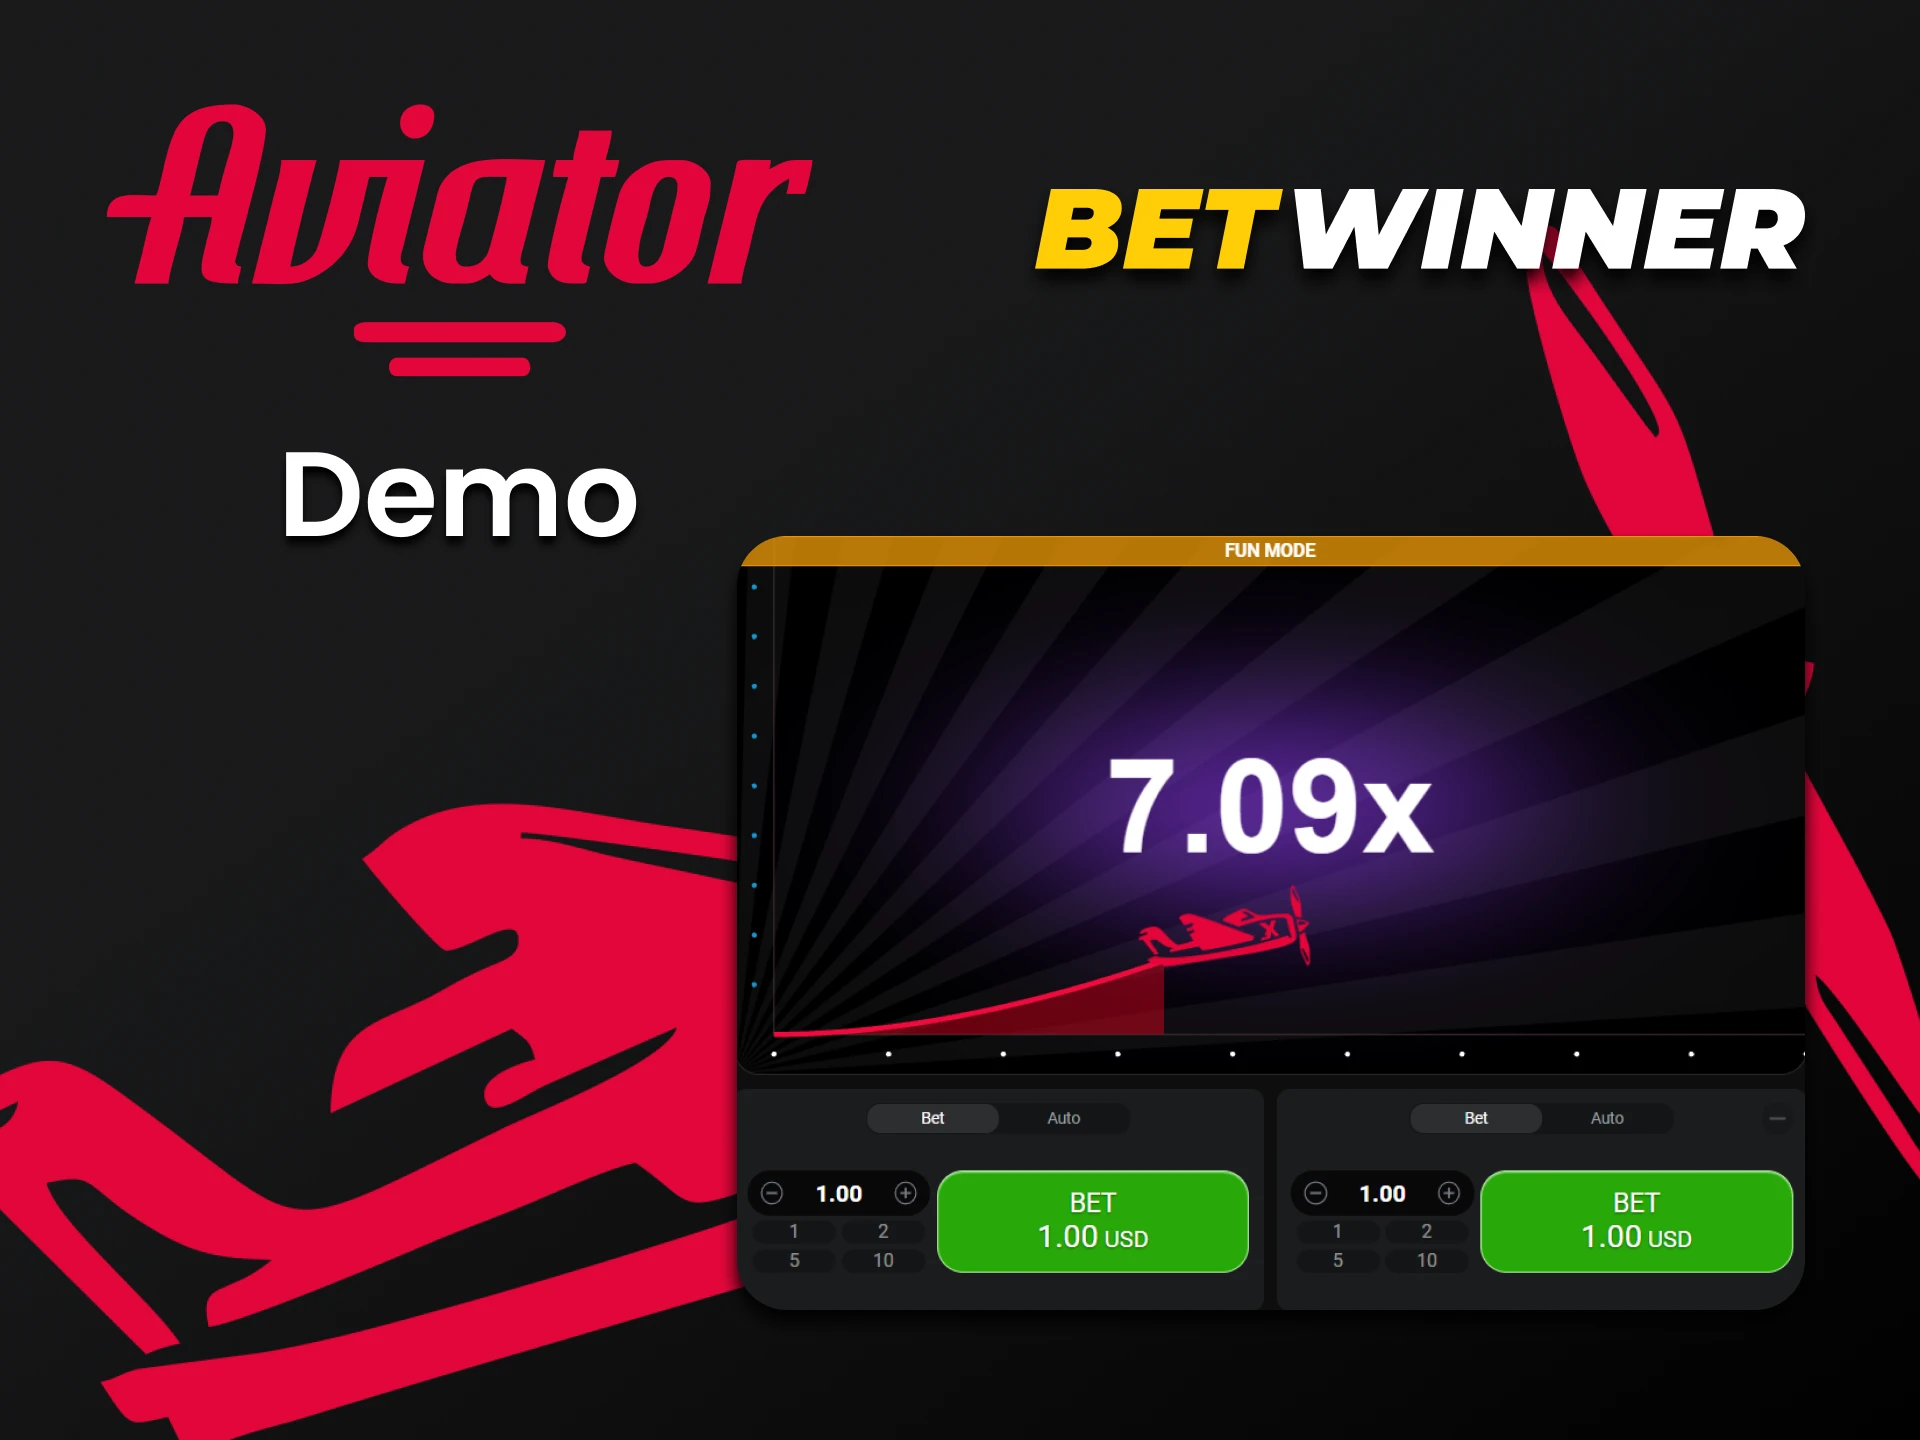 Practice in the demo version of the Aviator game on Betwinner.